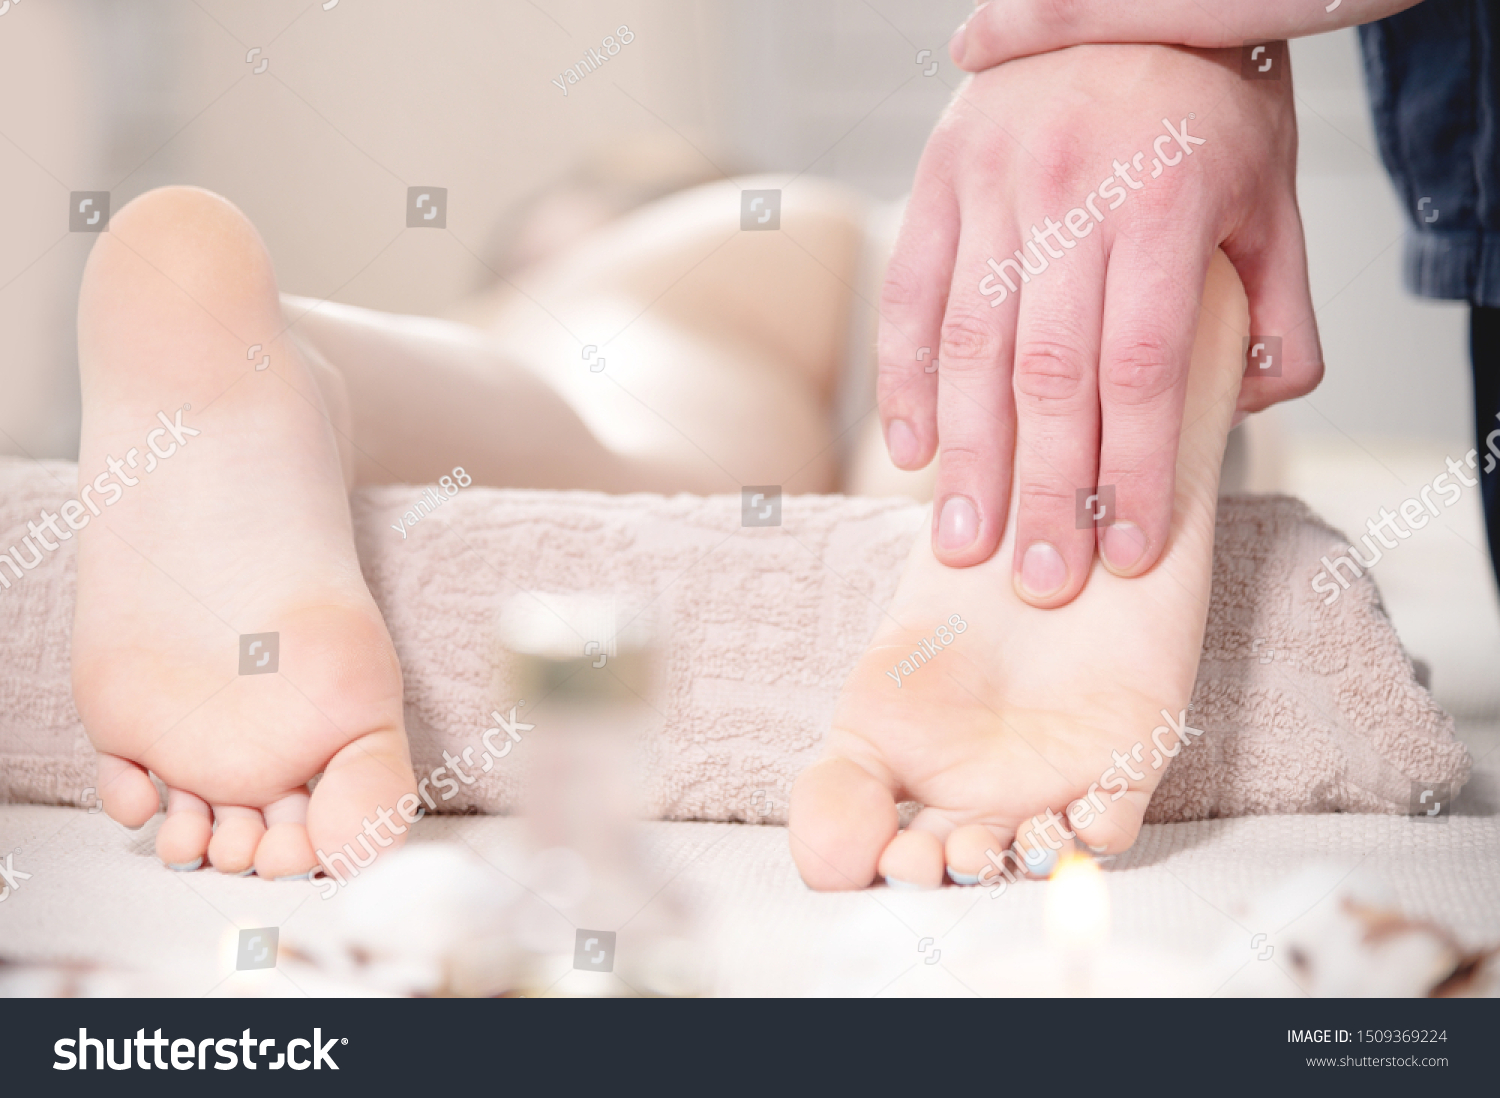 Male Foot Masters